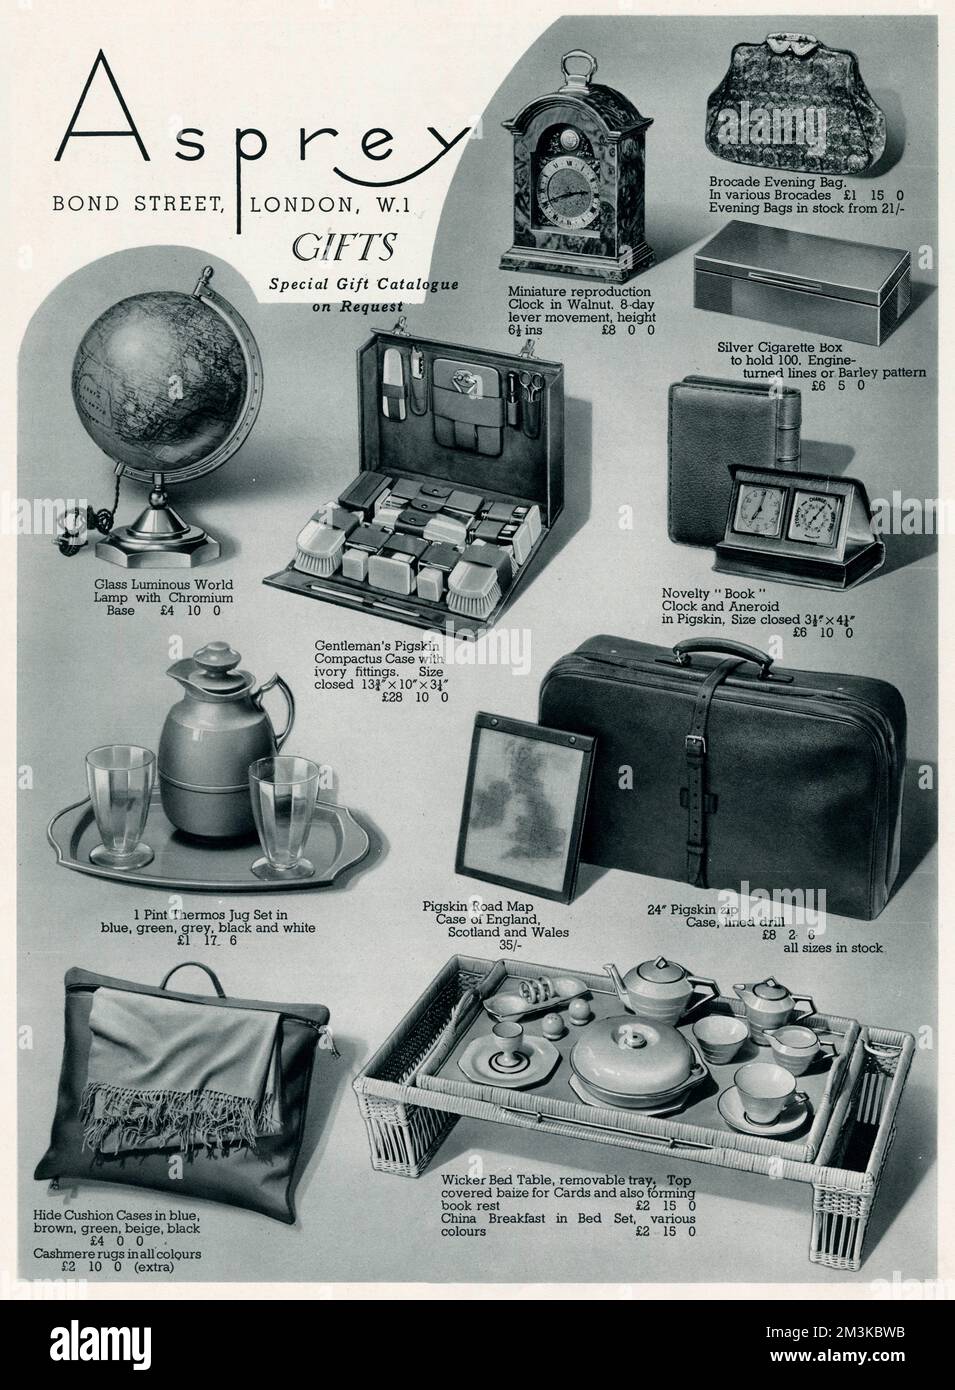 Selection of items from Asprey, Bond Street: Glass luminous World lamp, gentleman's pigskin compactus case with ivory fittings, miniature reproduction clock in walnut, brocade evening bag, pint thrermos jug set, pigskin road map case, pigskin zip luggage case, hide cushion cases and wicker bed table.     Date: 1937 Stock Photo